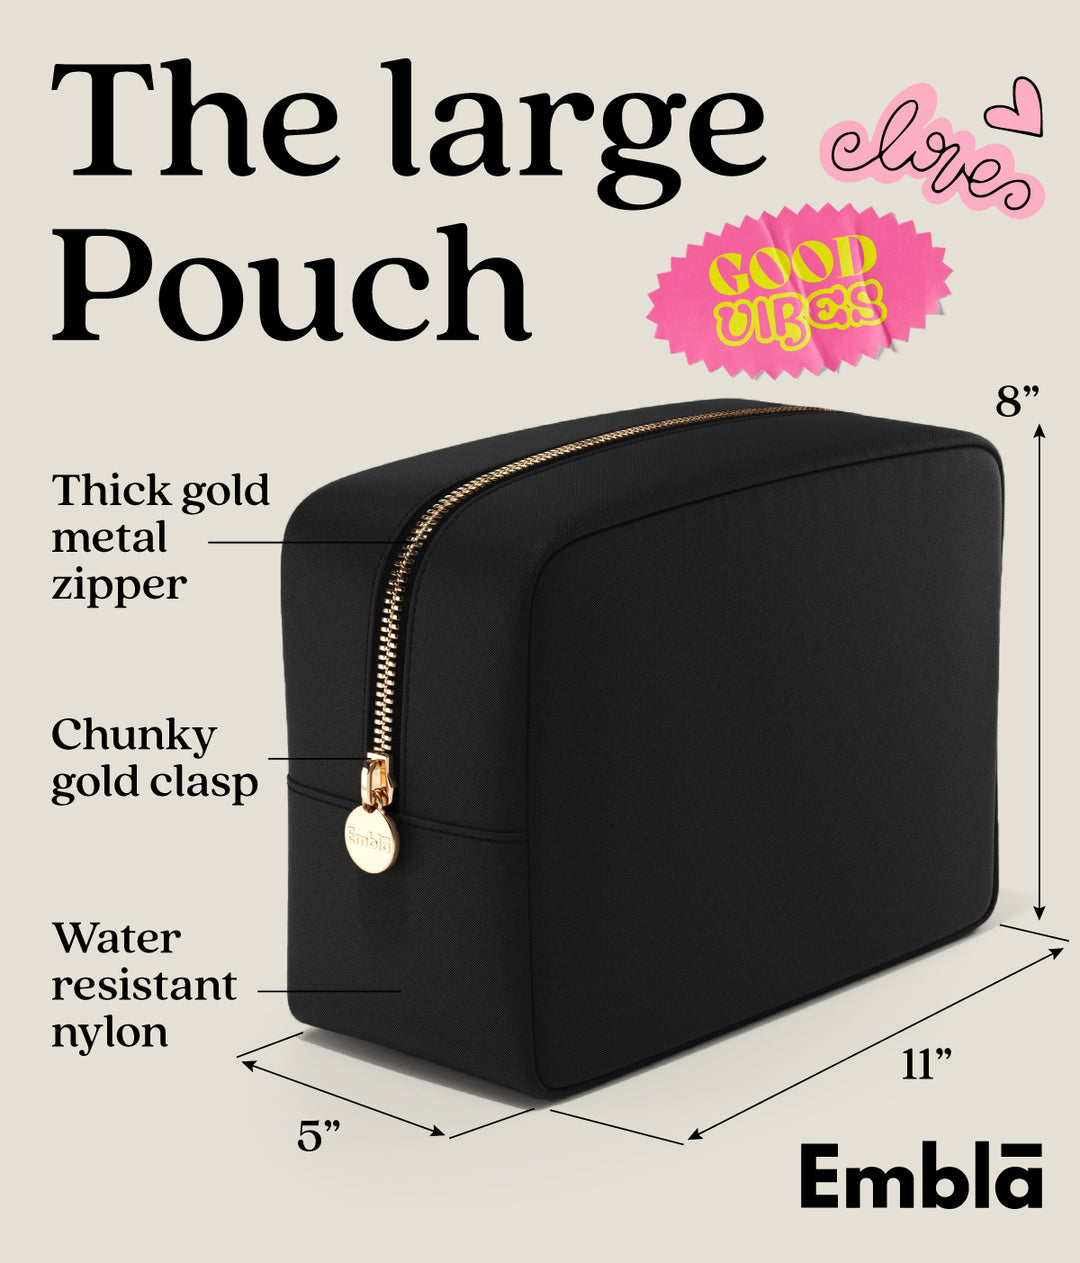 The Large Black Pouch